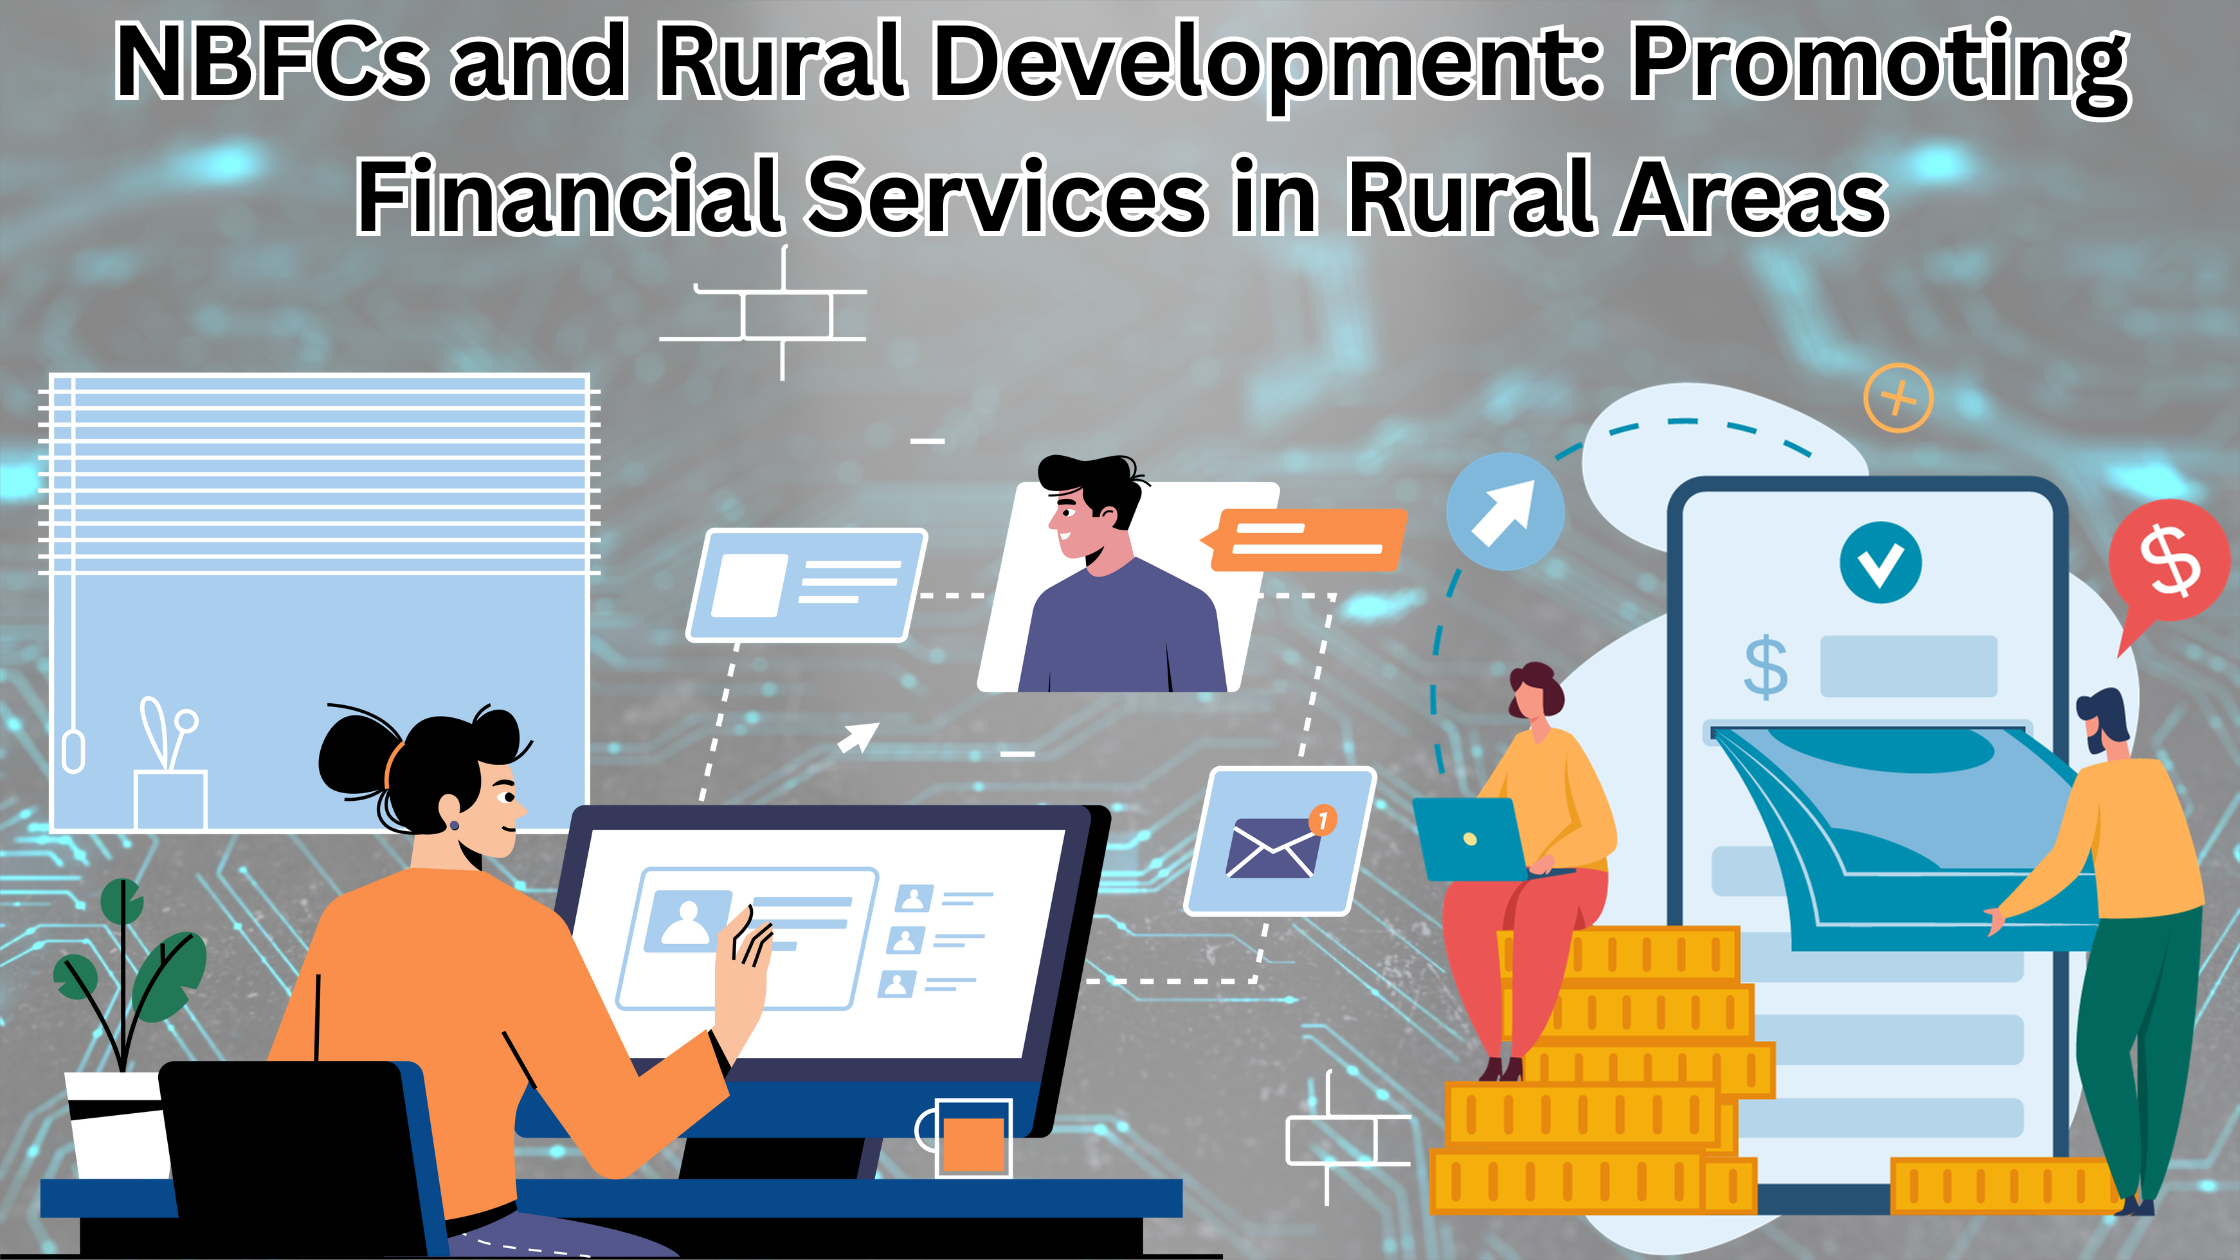 NBFCs and Rural Development: Promoting Financial Services in Rural Areas